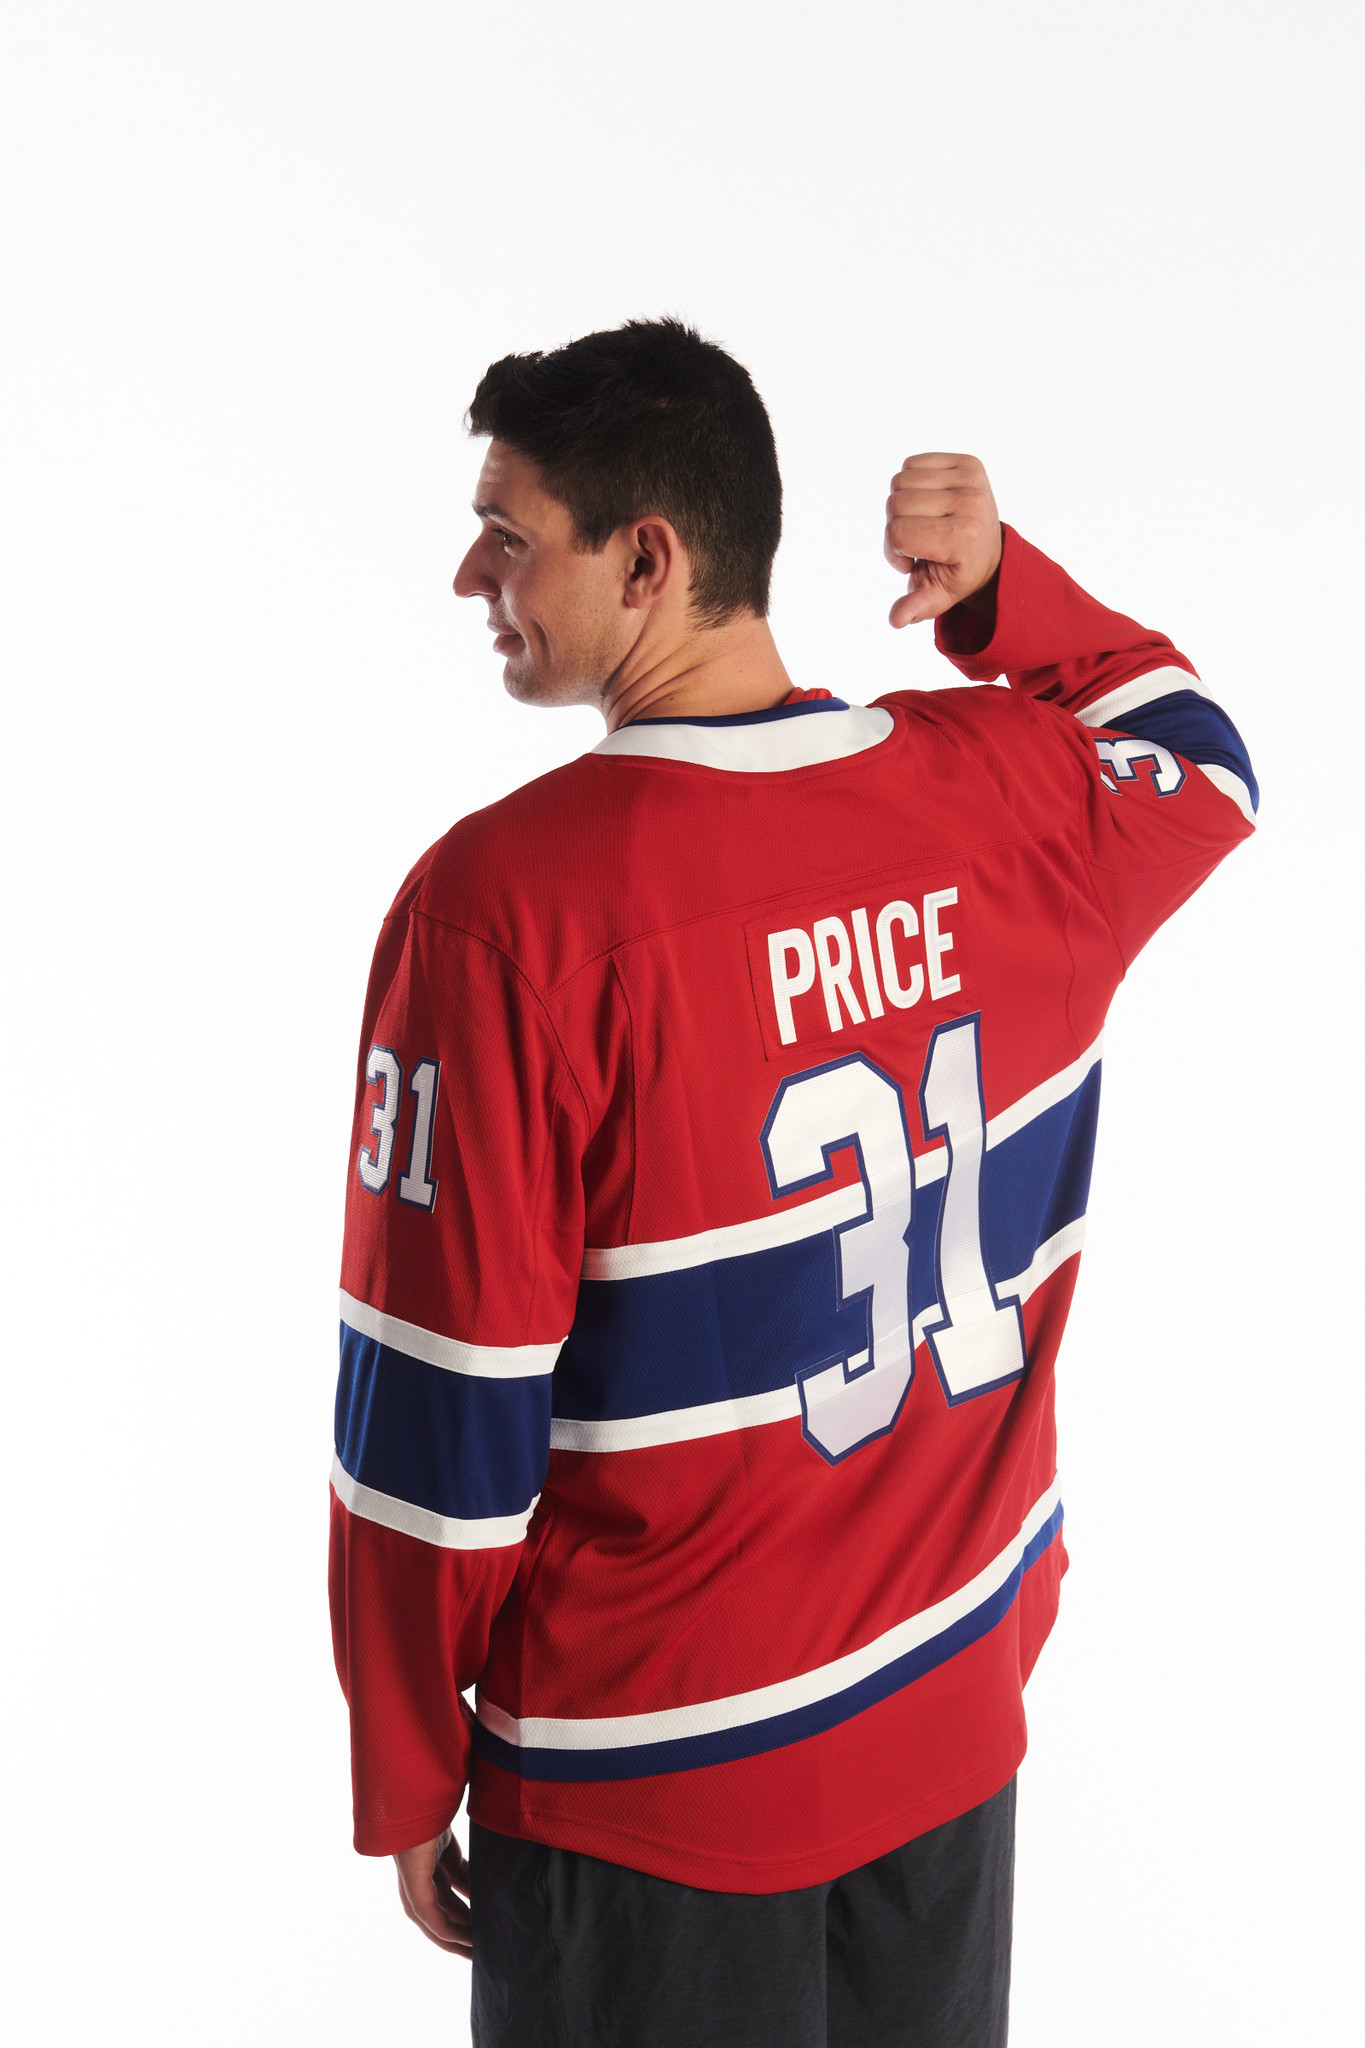 Carey Price Montreal Canadiens Unsigned Red Jersey in Net Photograph